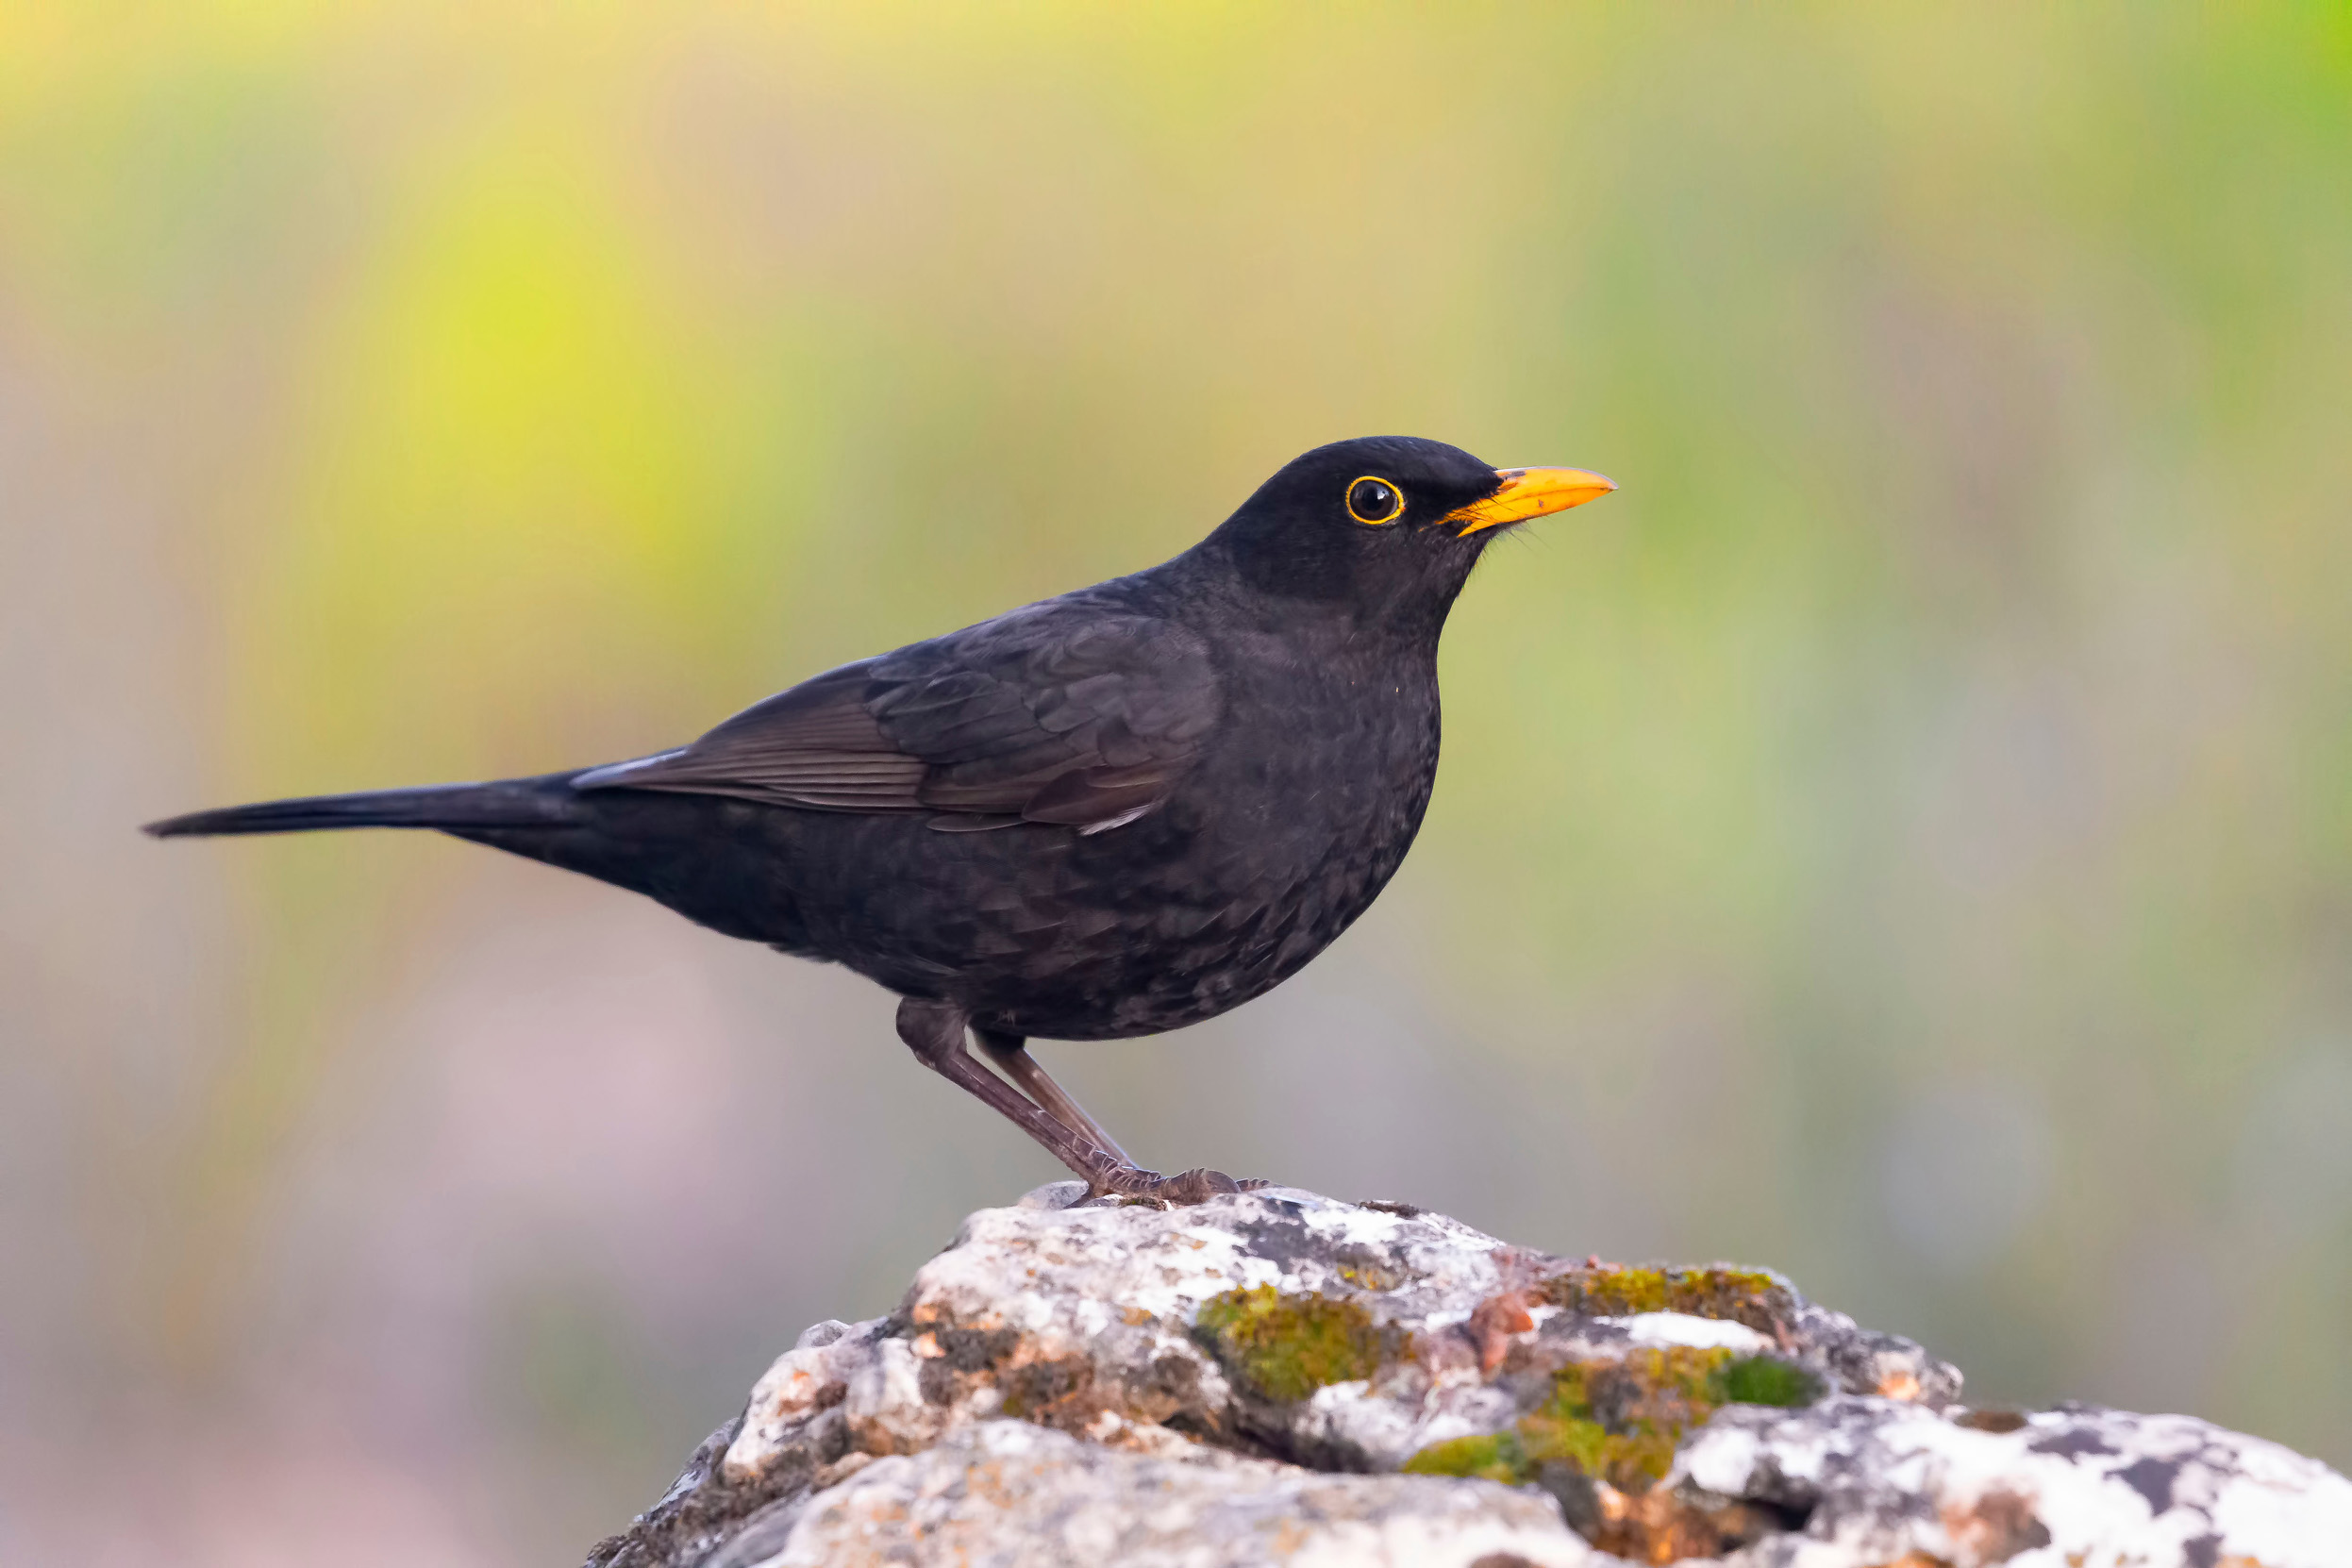 A Common Blackbird perched on a moss covered rock.